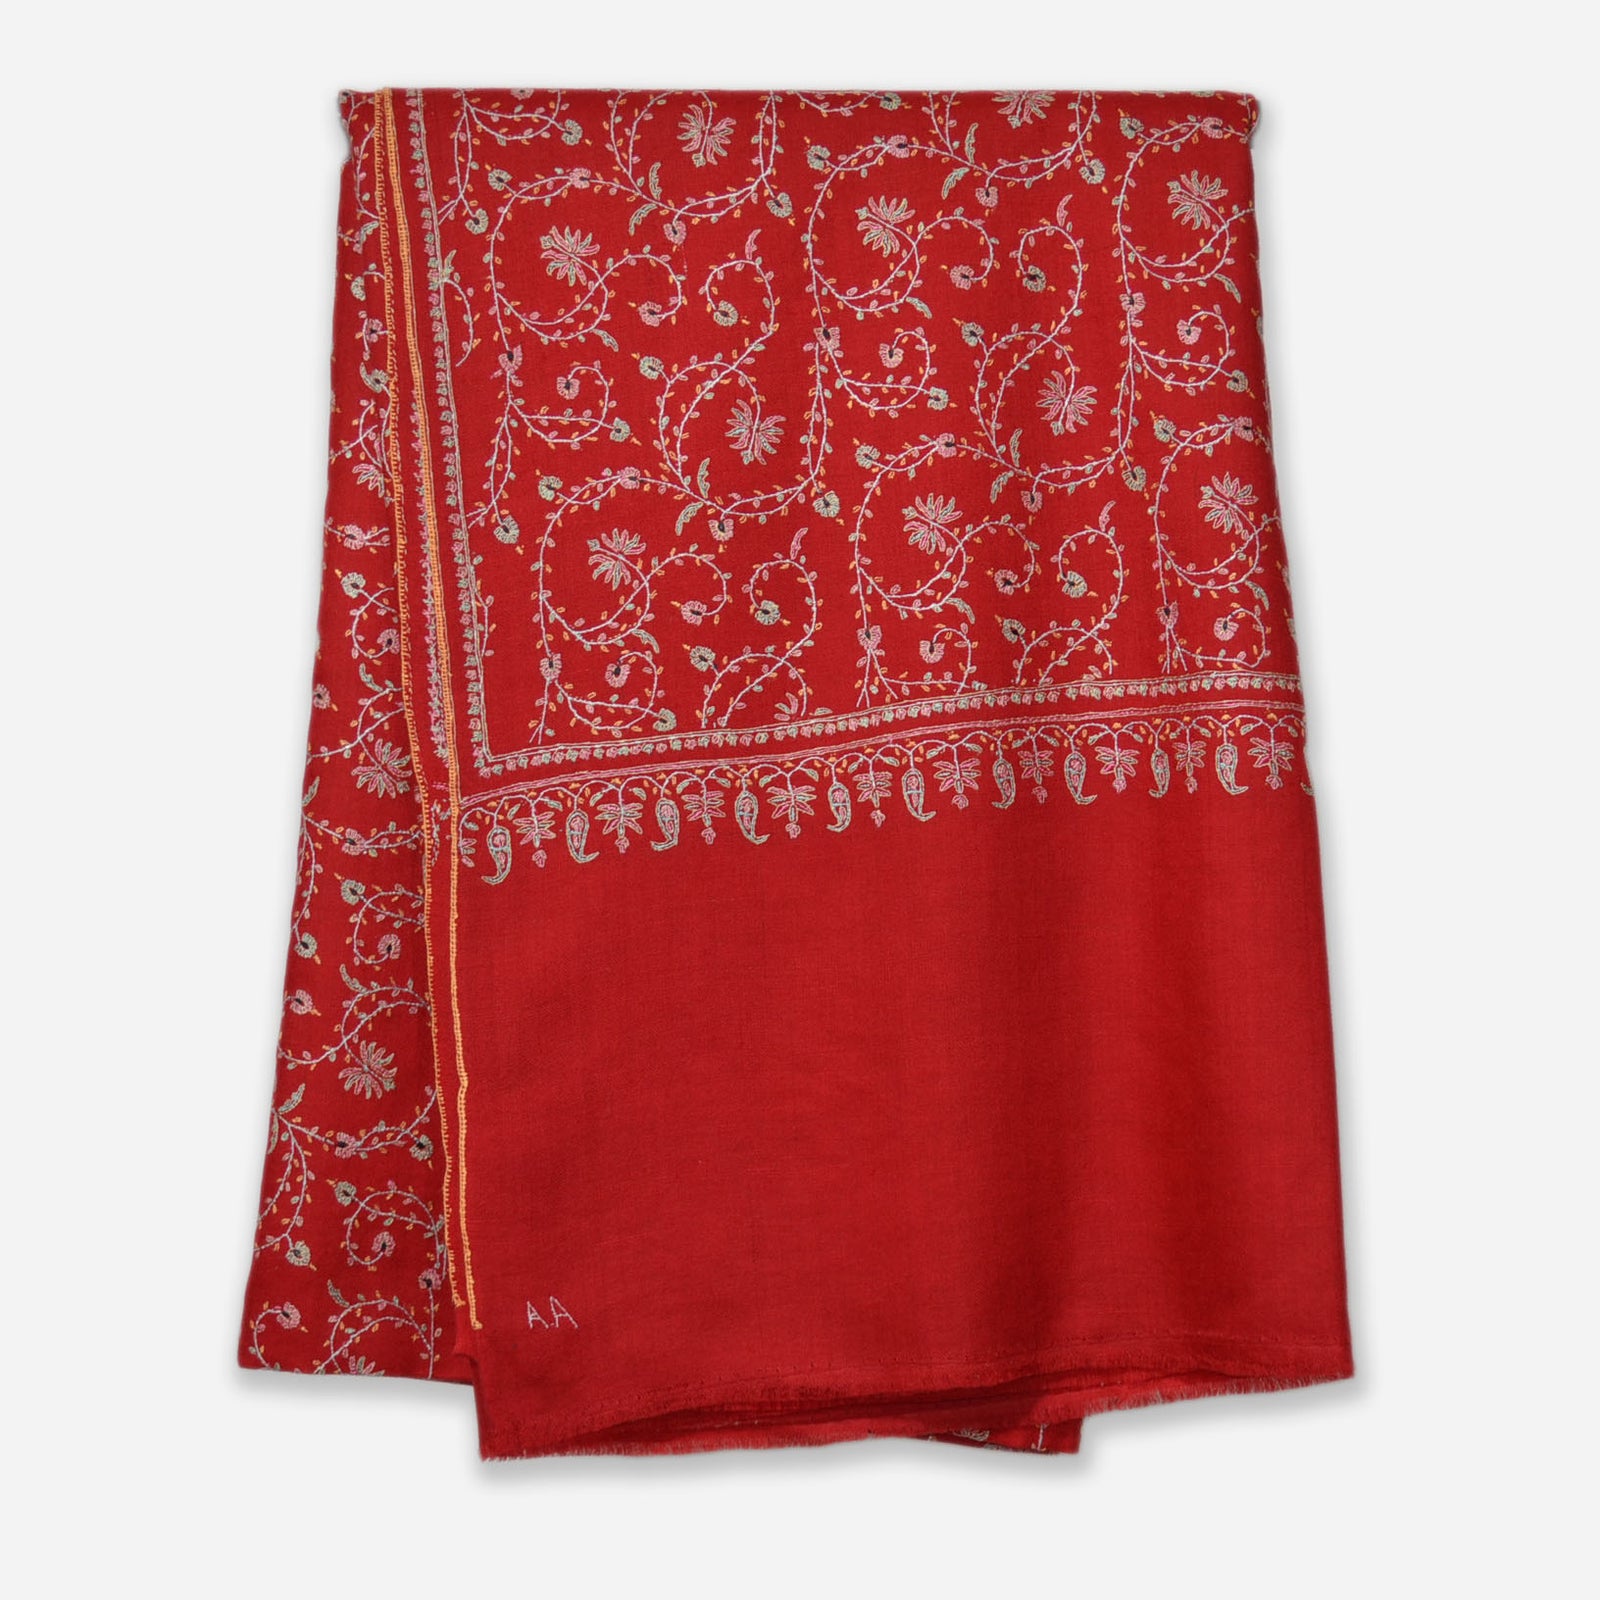 Red Jali Embroidery Cashmere Travel Wrap